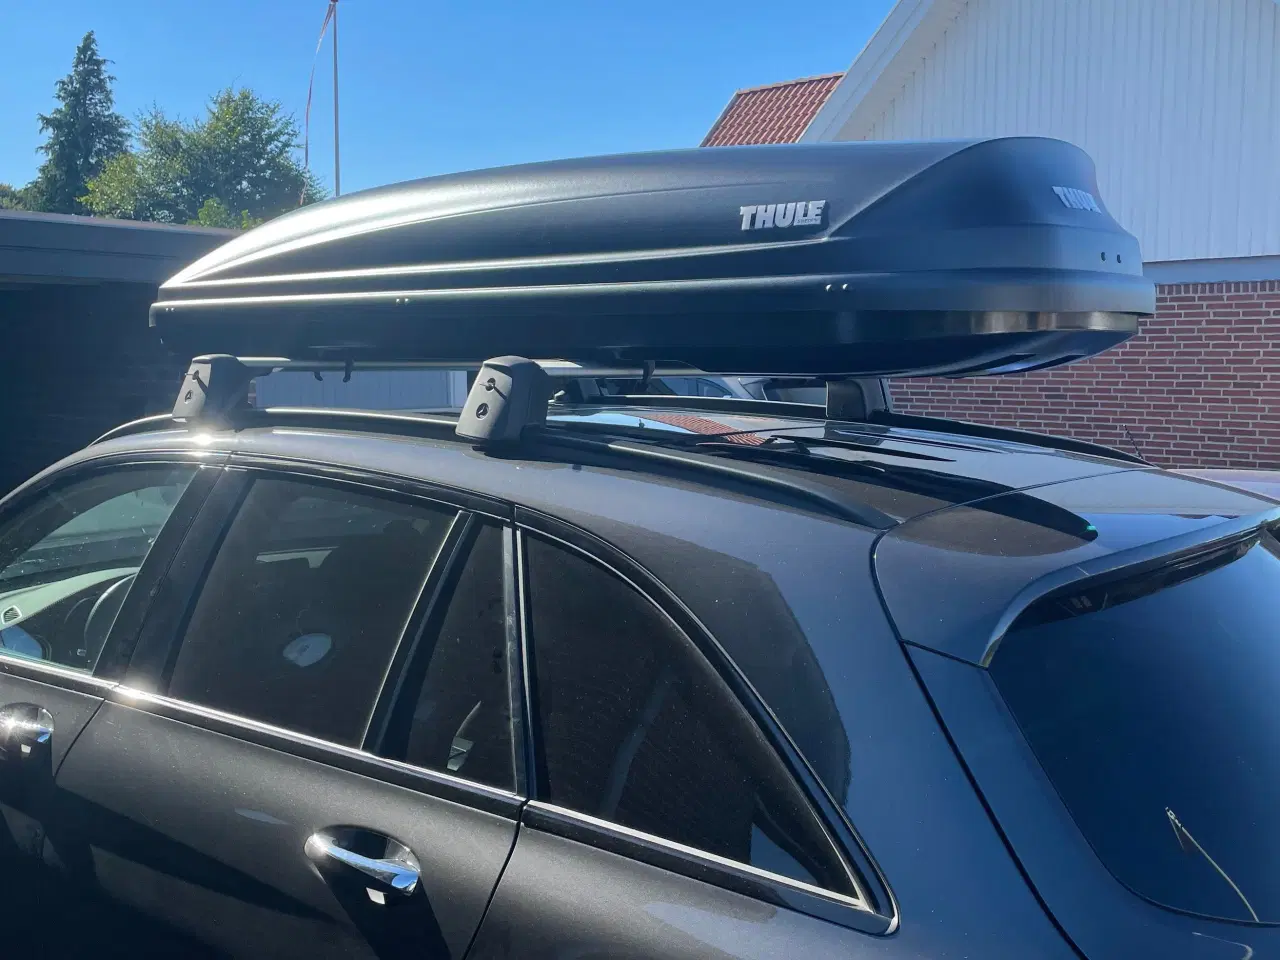 Billede 4 - THULE Pacific 700 Tagboks UDLEJES